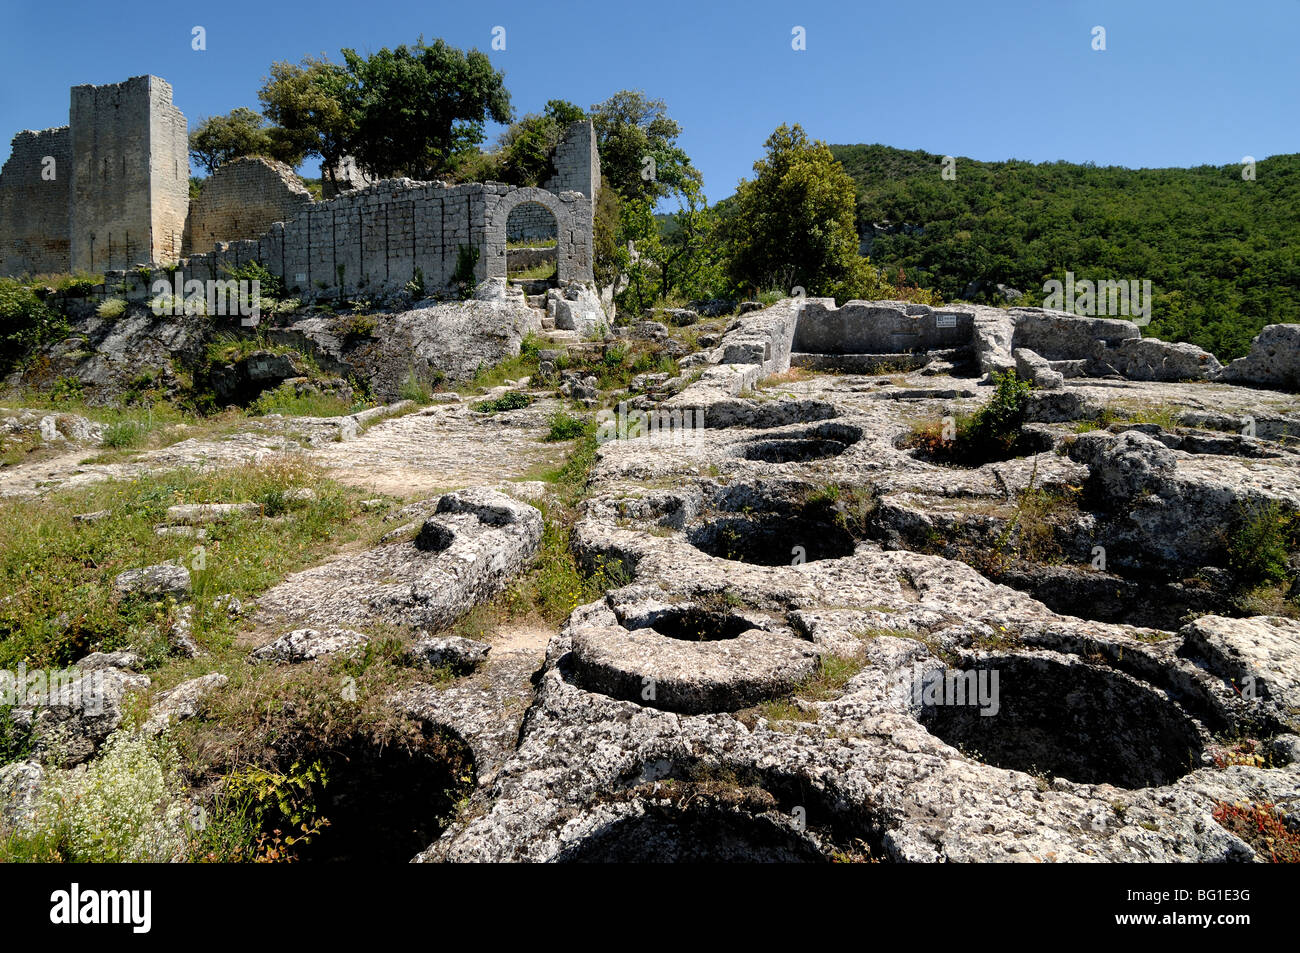 Buoux Fort or Fortress Entrance with Rock-Cut Protohistoric Storage Silos or Jars, Luberon, Vaucluse, Provence, France Stock Photo